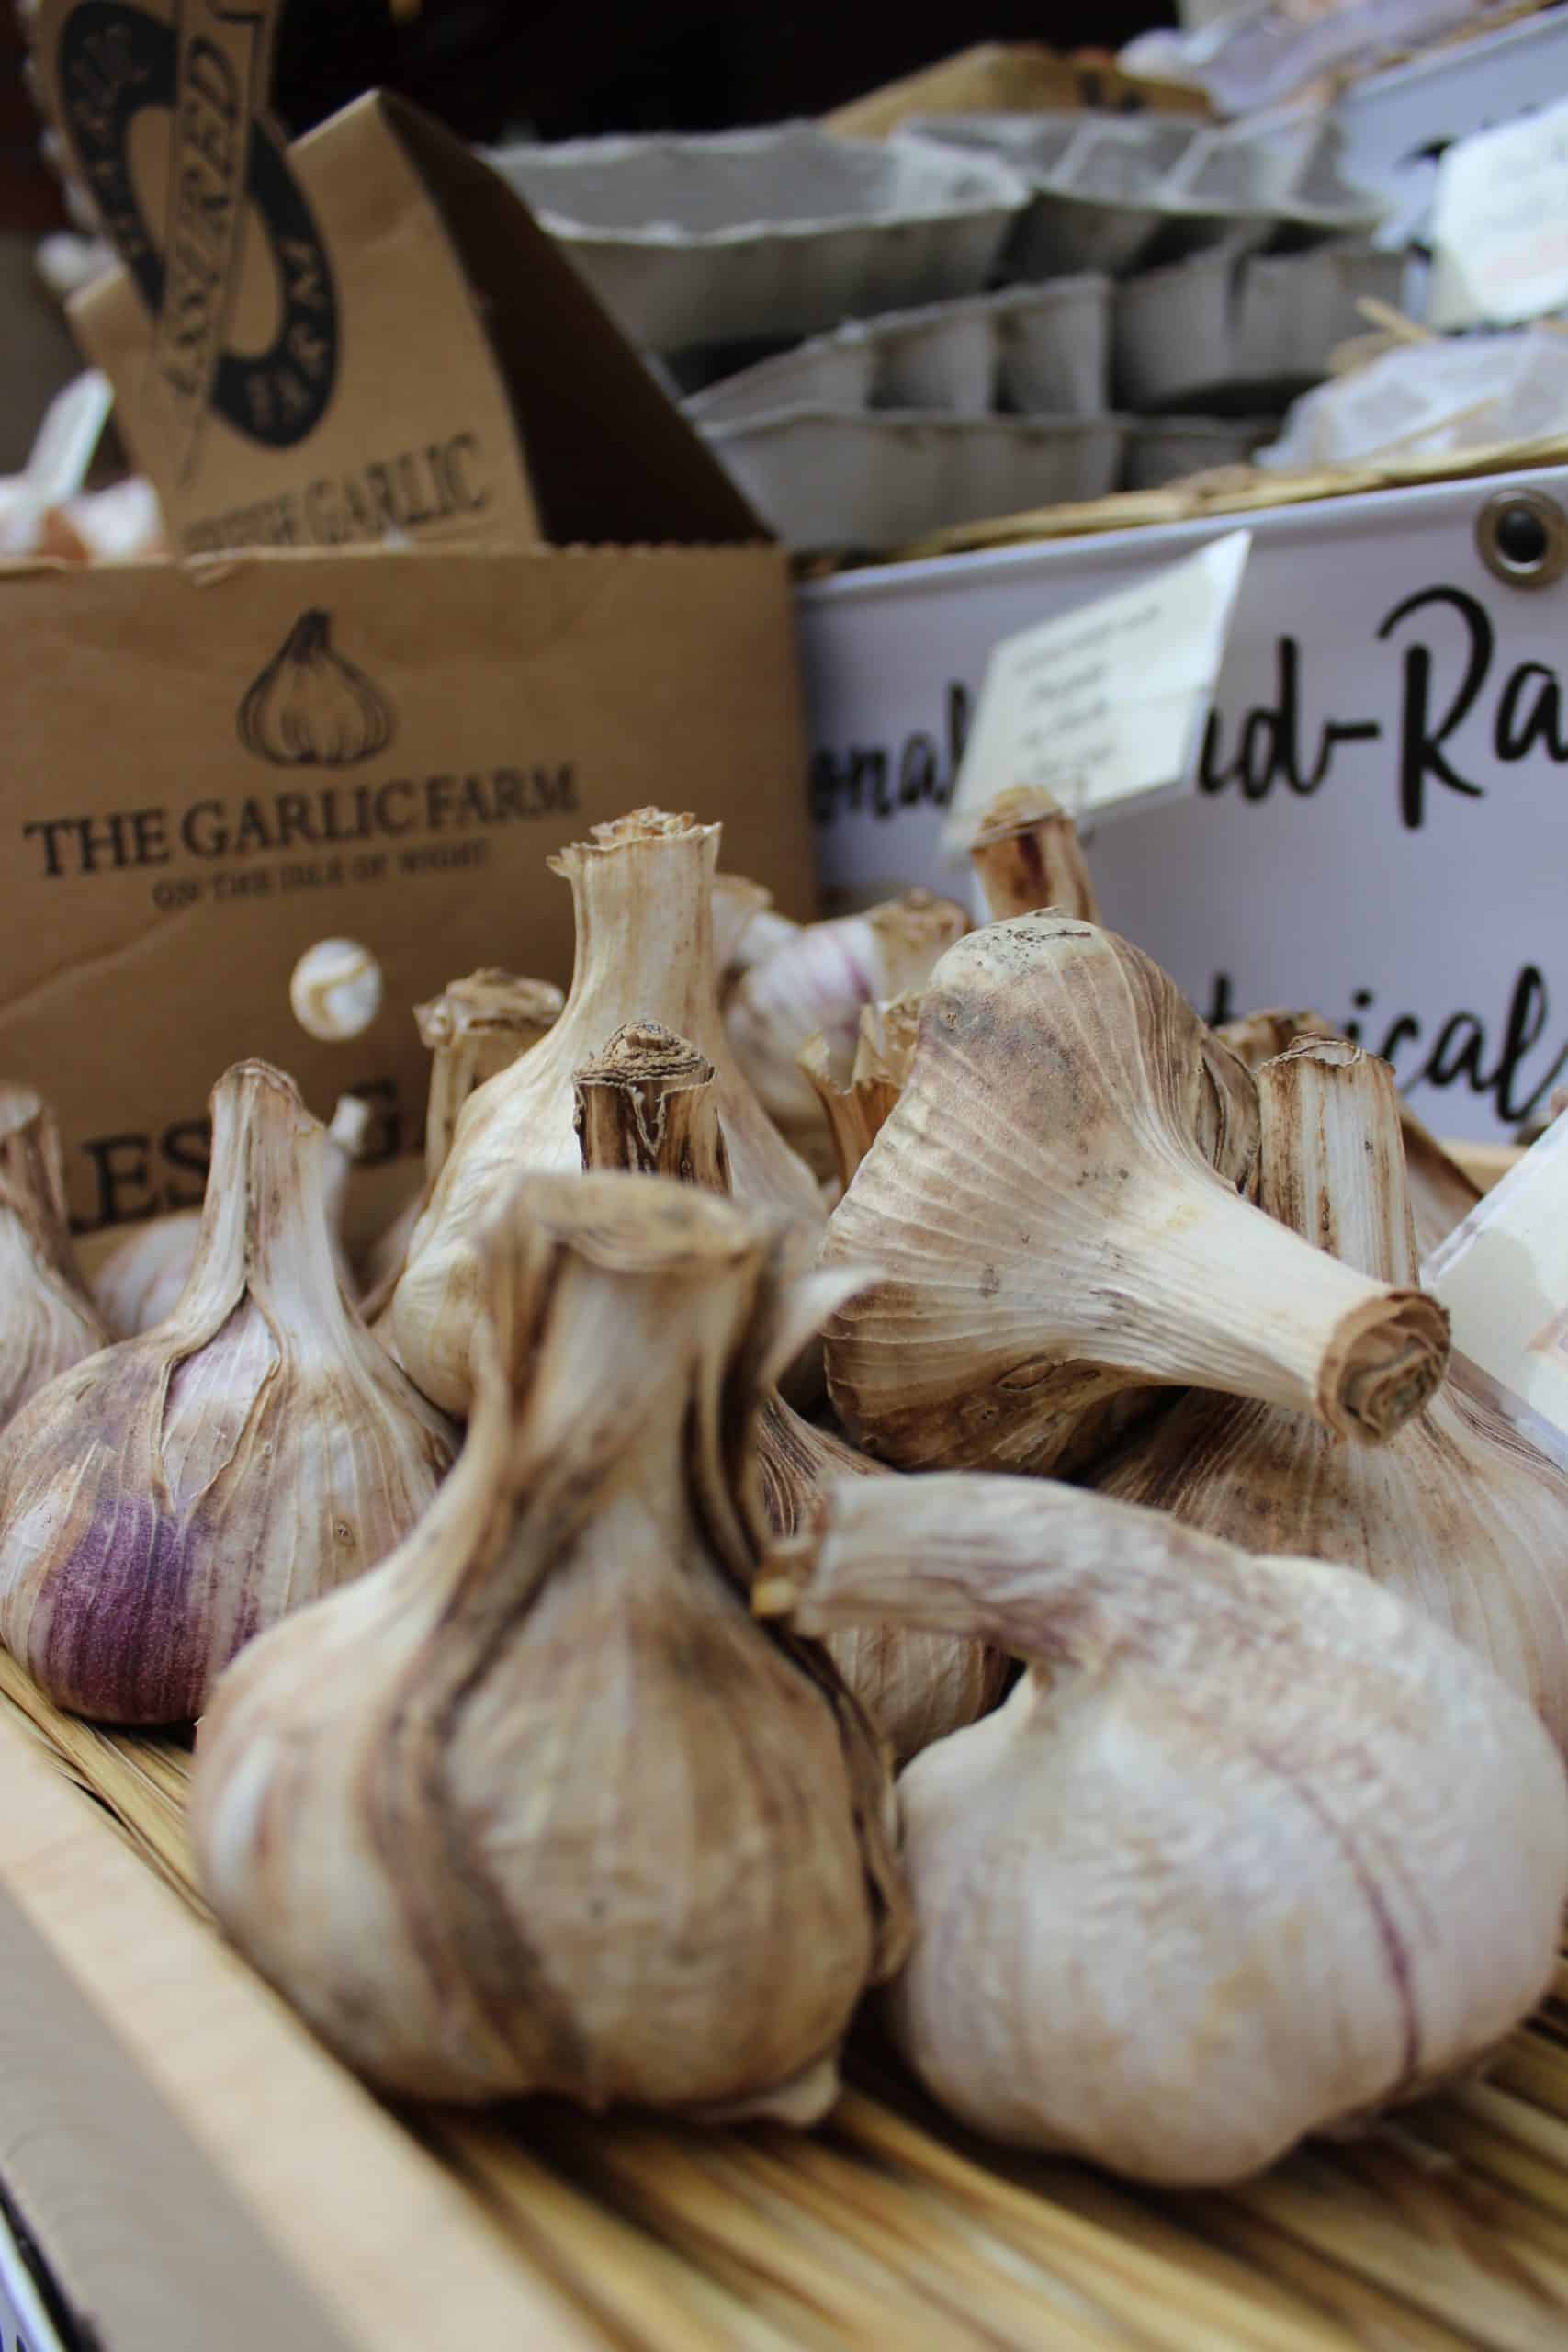 How to Use Garlic for Health + in the Kitchen